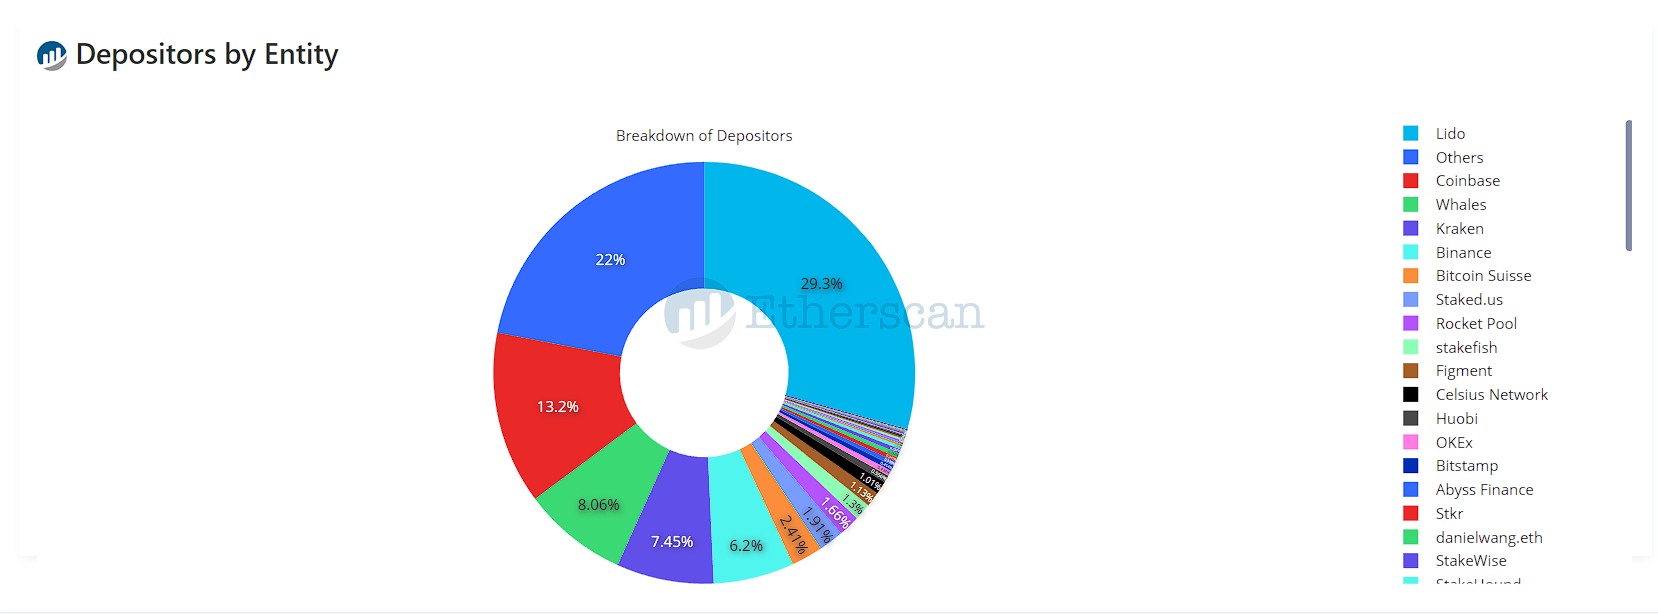 Depositors by entity pie chart. 